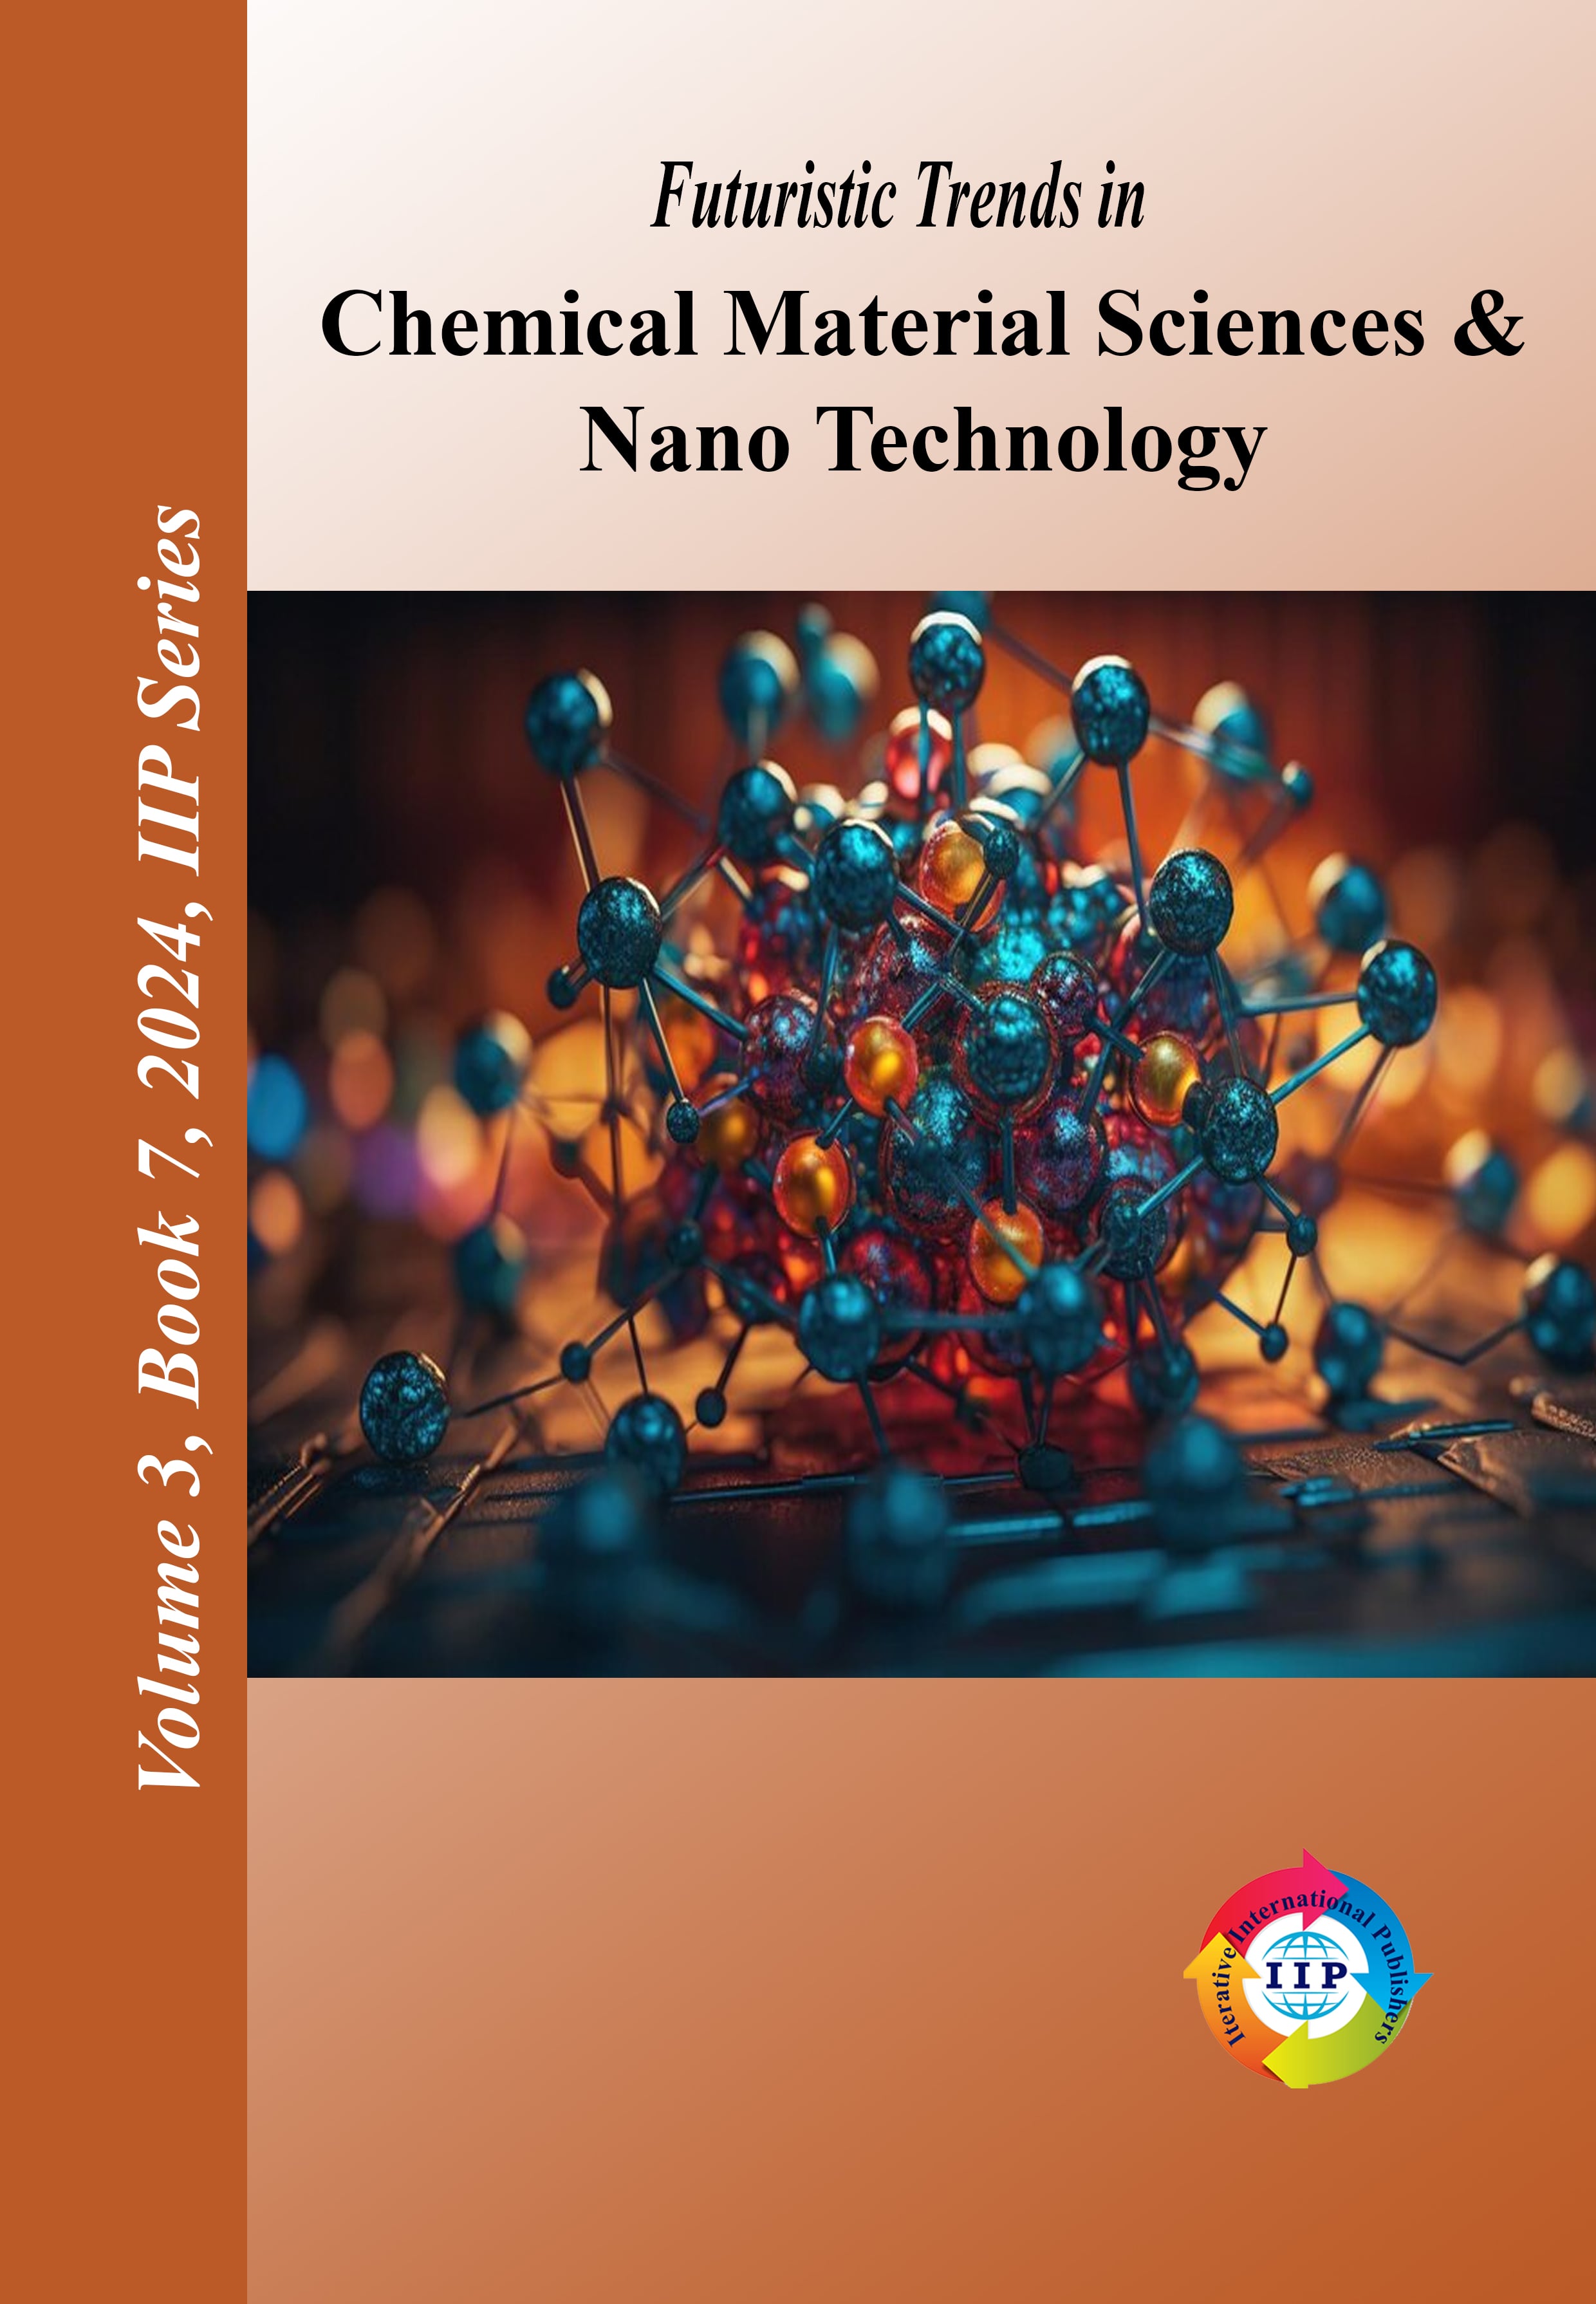 Futuristic Trends in Chemical Material Sciences & Nano Technology  Volume 3 Book 7